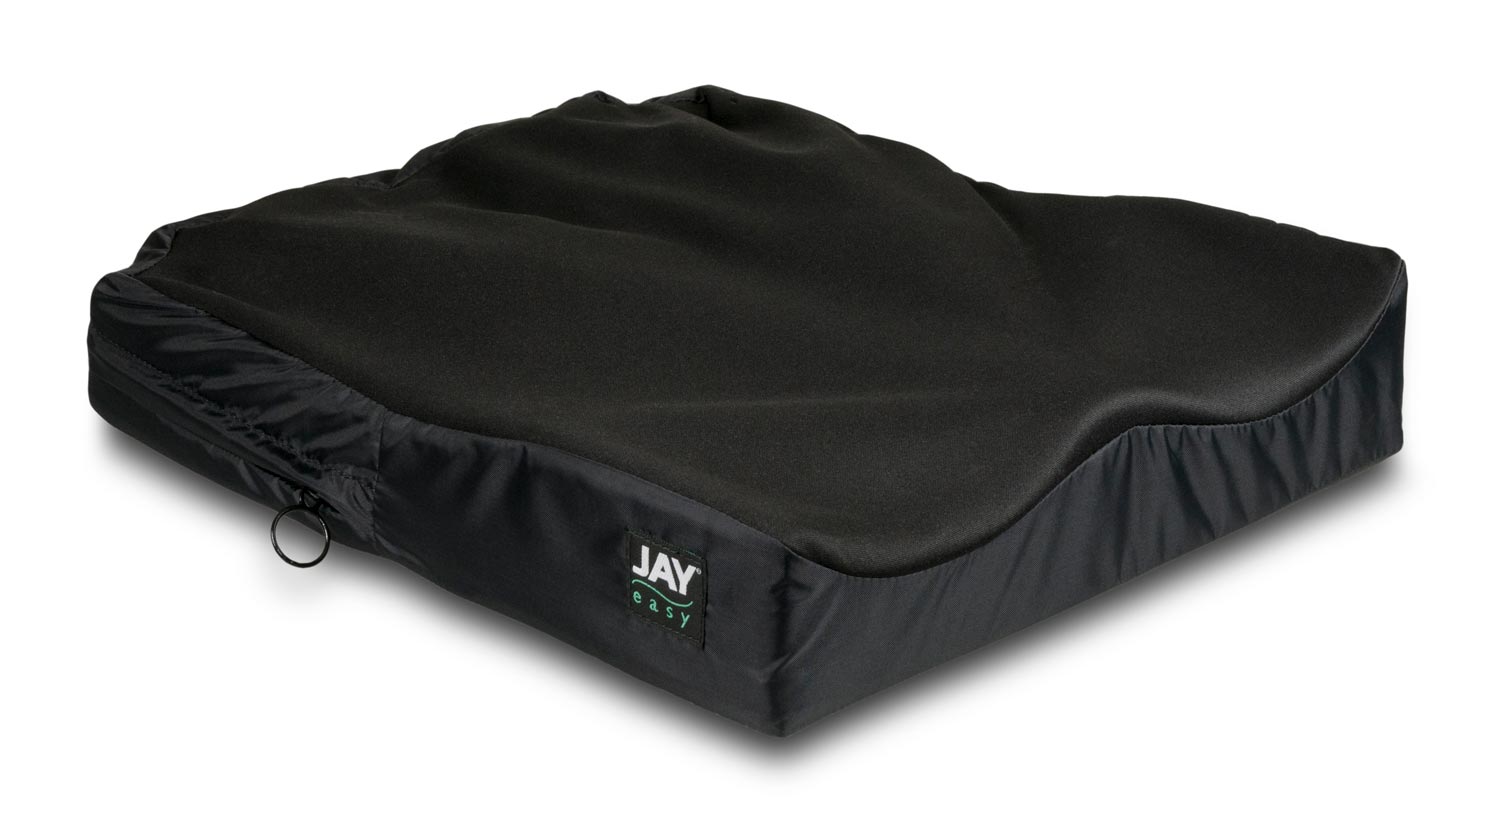 https://www.sunrisemedical.com/getattachment/seating-positioning/Jay/Wheelchair-Cushions/Easy-Cushion/Product-Features/3-Moisture-Resistant-Cover-with-No-Slip-Bottom/JAY_Easy_feature3.jpg.aspx?lang=en-US&width=1500&height=827&ext=.jpg%}?width=960